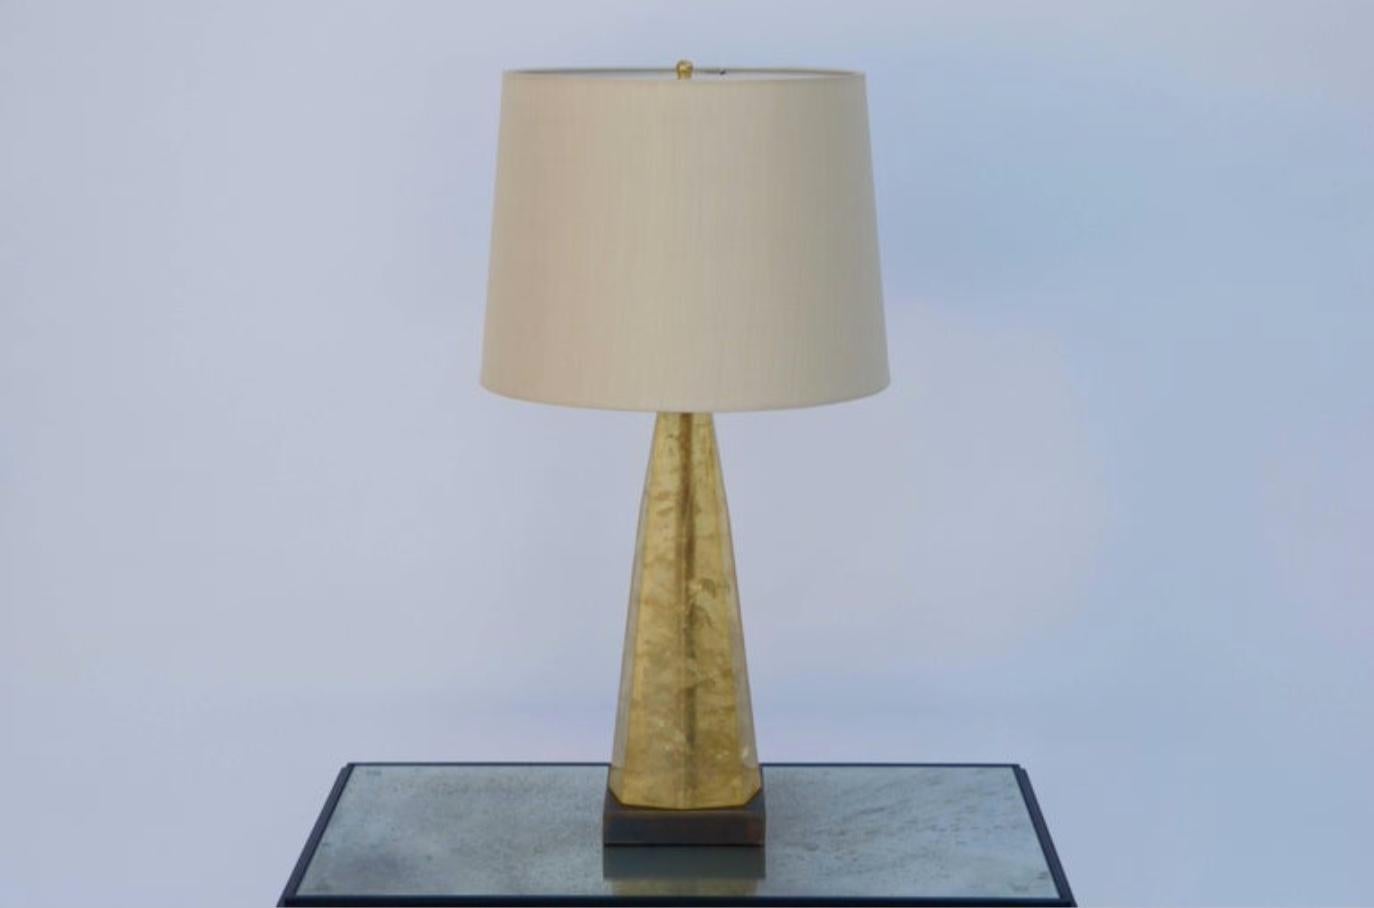 Fractal resin lamp in the style of Marie-Claude de Fouquières, circa 1975. Obelisk shaped fractal resin column over a patinated brass base. Rewired with custom cream silk shade and matching top diffuser. Very chic lamp.

Shade measurement: 14'